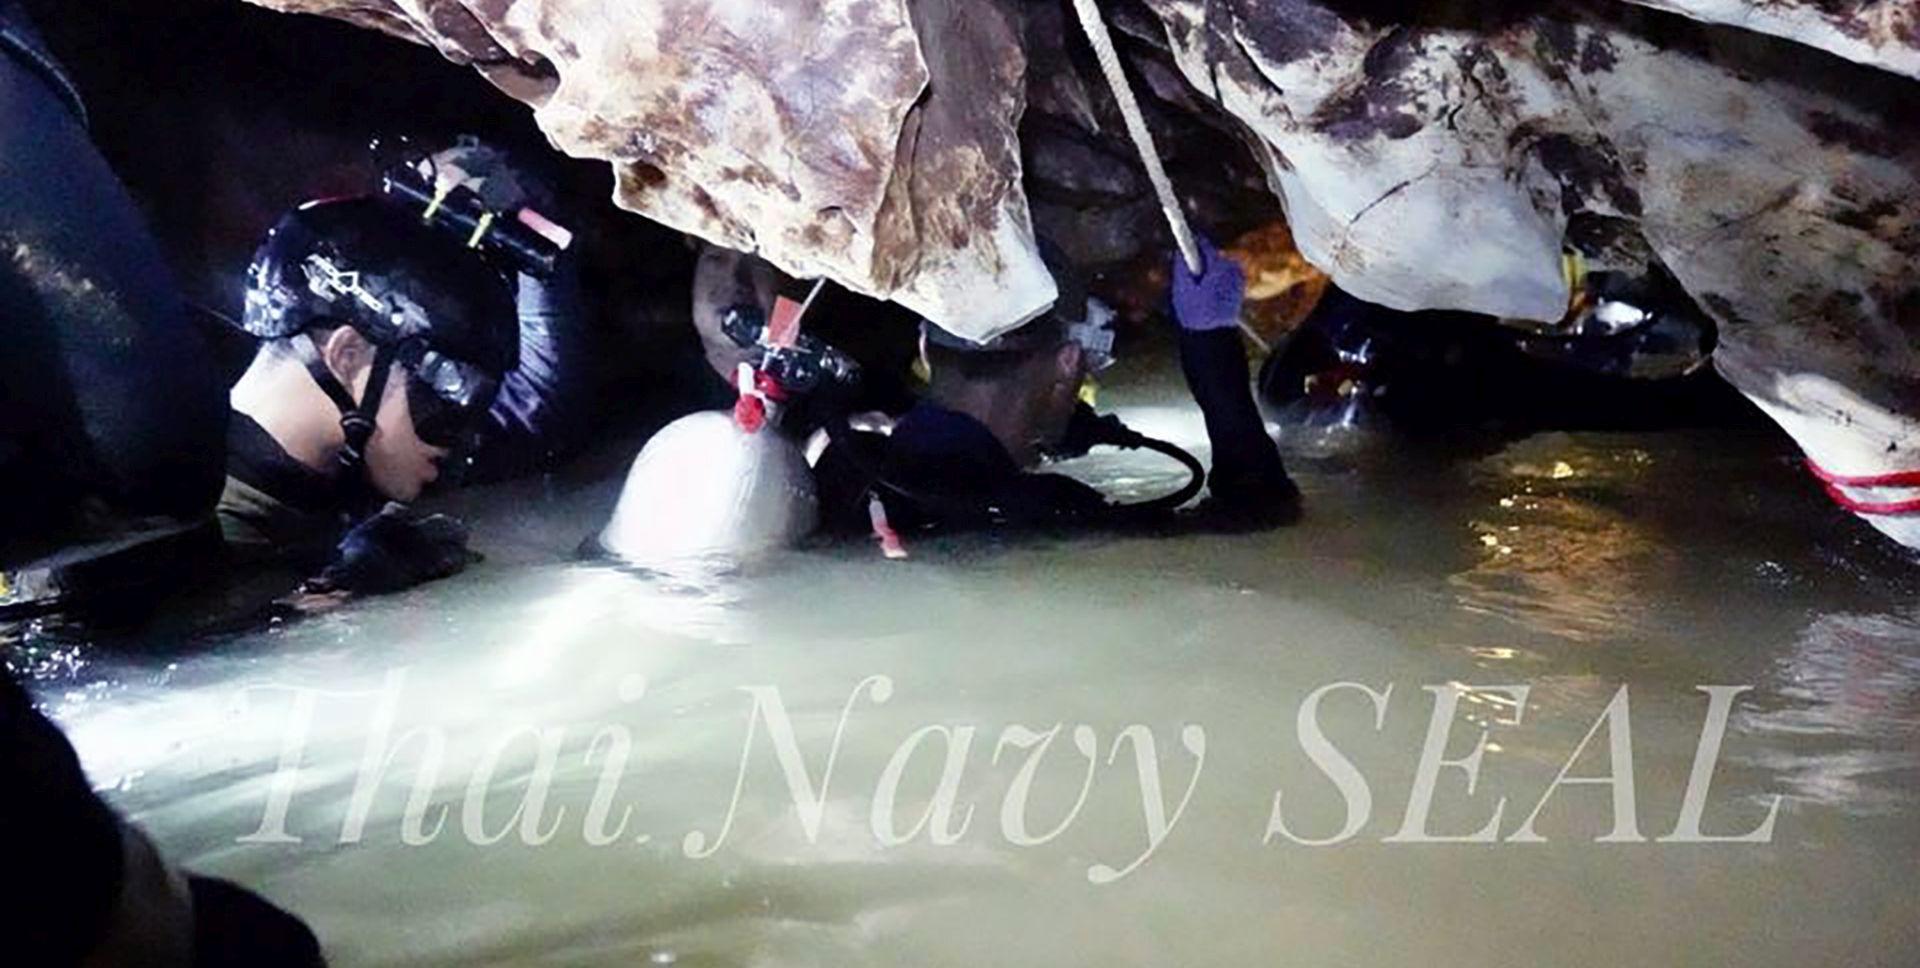 epa06863734 A handout photo made available by Thai Navy Seal on 04 July 2018 shows Thai Navy officer and rescuers work inside a cave complex during the ongoing rescue operations for the child soccer team and their assistant coach, at Tham Luang cave in Khun Nam Nang Non Forest Park, Chiang Rai province, Thailand. Rescuers are bringing supplies and foods into the cave, where the missing 12 boys and their assistant coach remain, as efforts to drain the cave have not been successful due to rainy weather. Operations are underway to safely bring out the youth soccer team out of the cave. Thirteen of a youth soccer team including their assistant coach were trapped in Tham Luang cave since 23 June 2018.  EPA/THAI NAVY SEAL / HANDOUT ONLY WATERMARKED VERSION AVAILABLE HANDOUT EDITORIAL USE ONLY/NO SALES